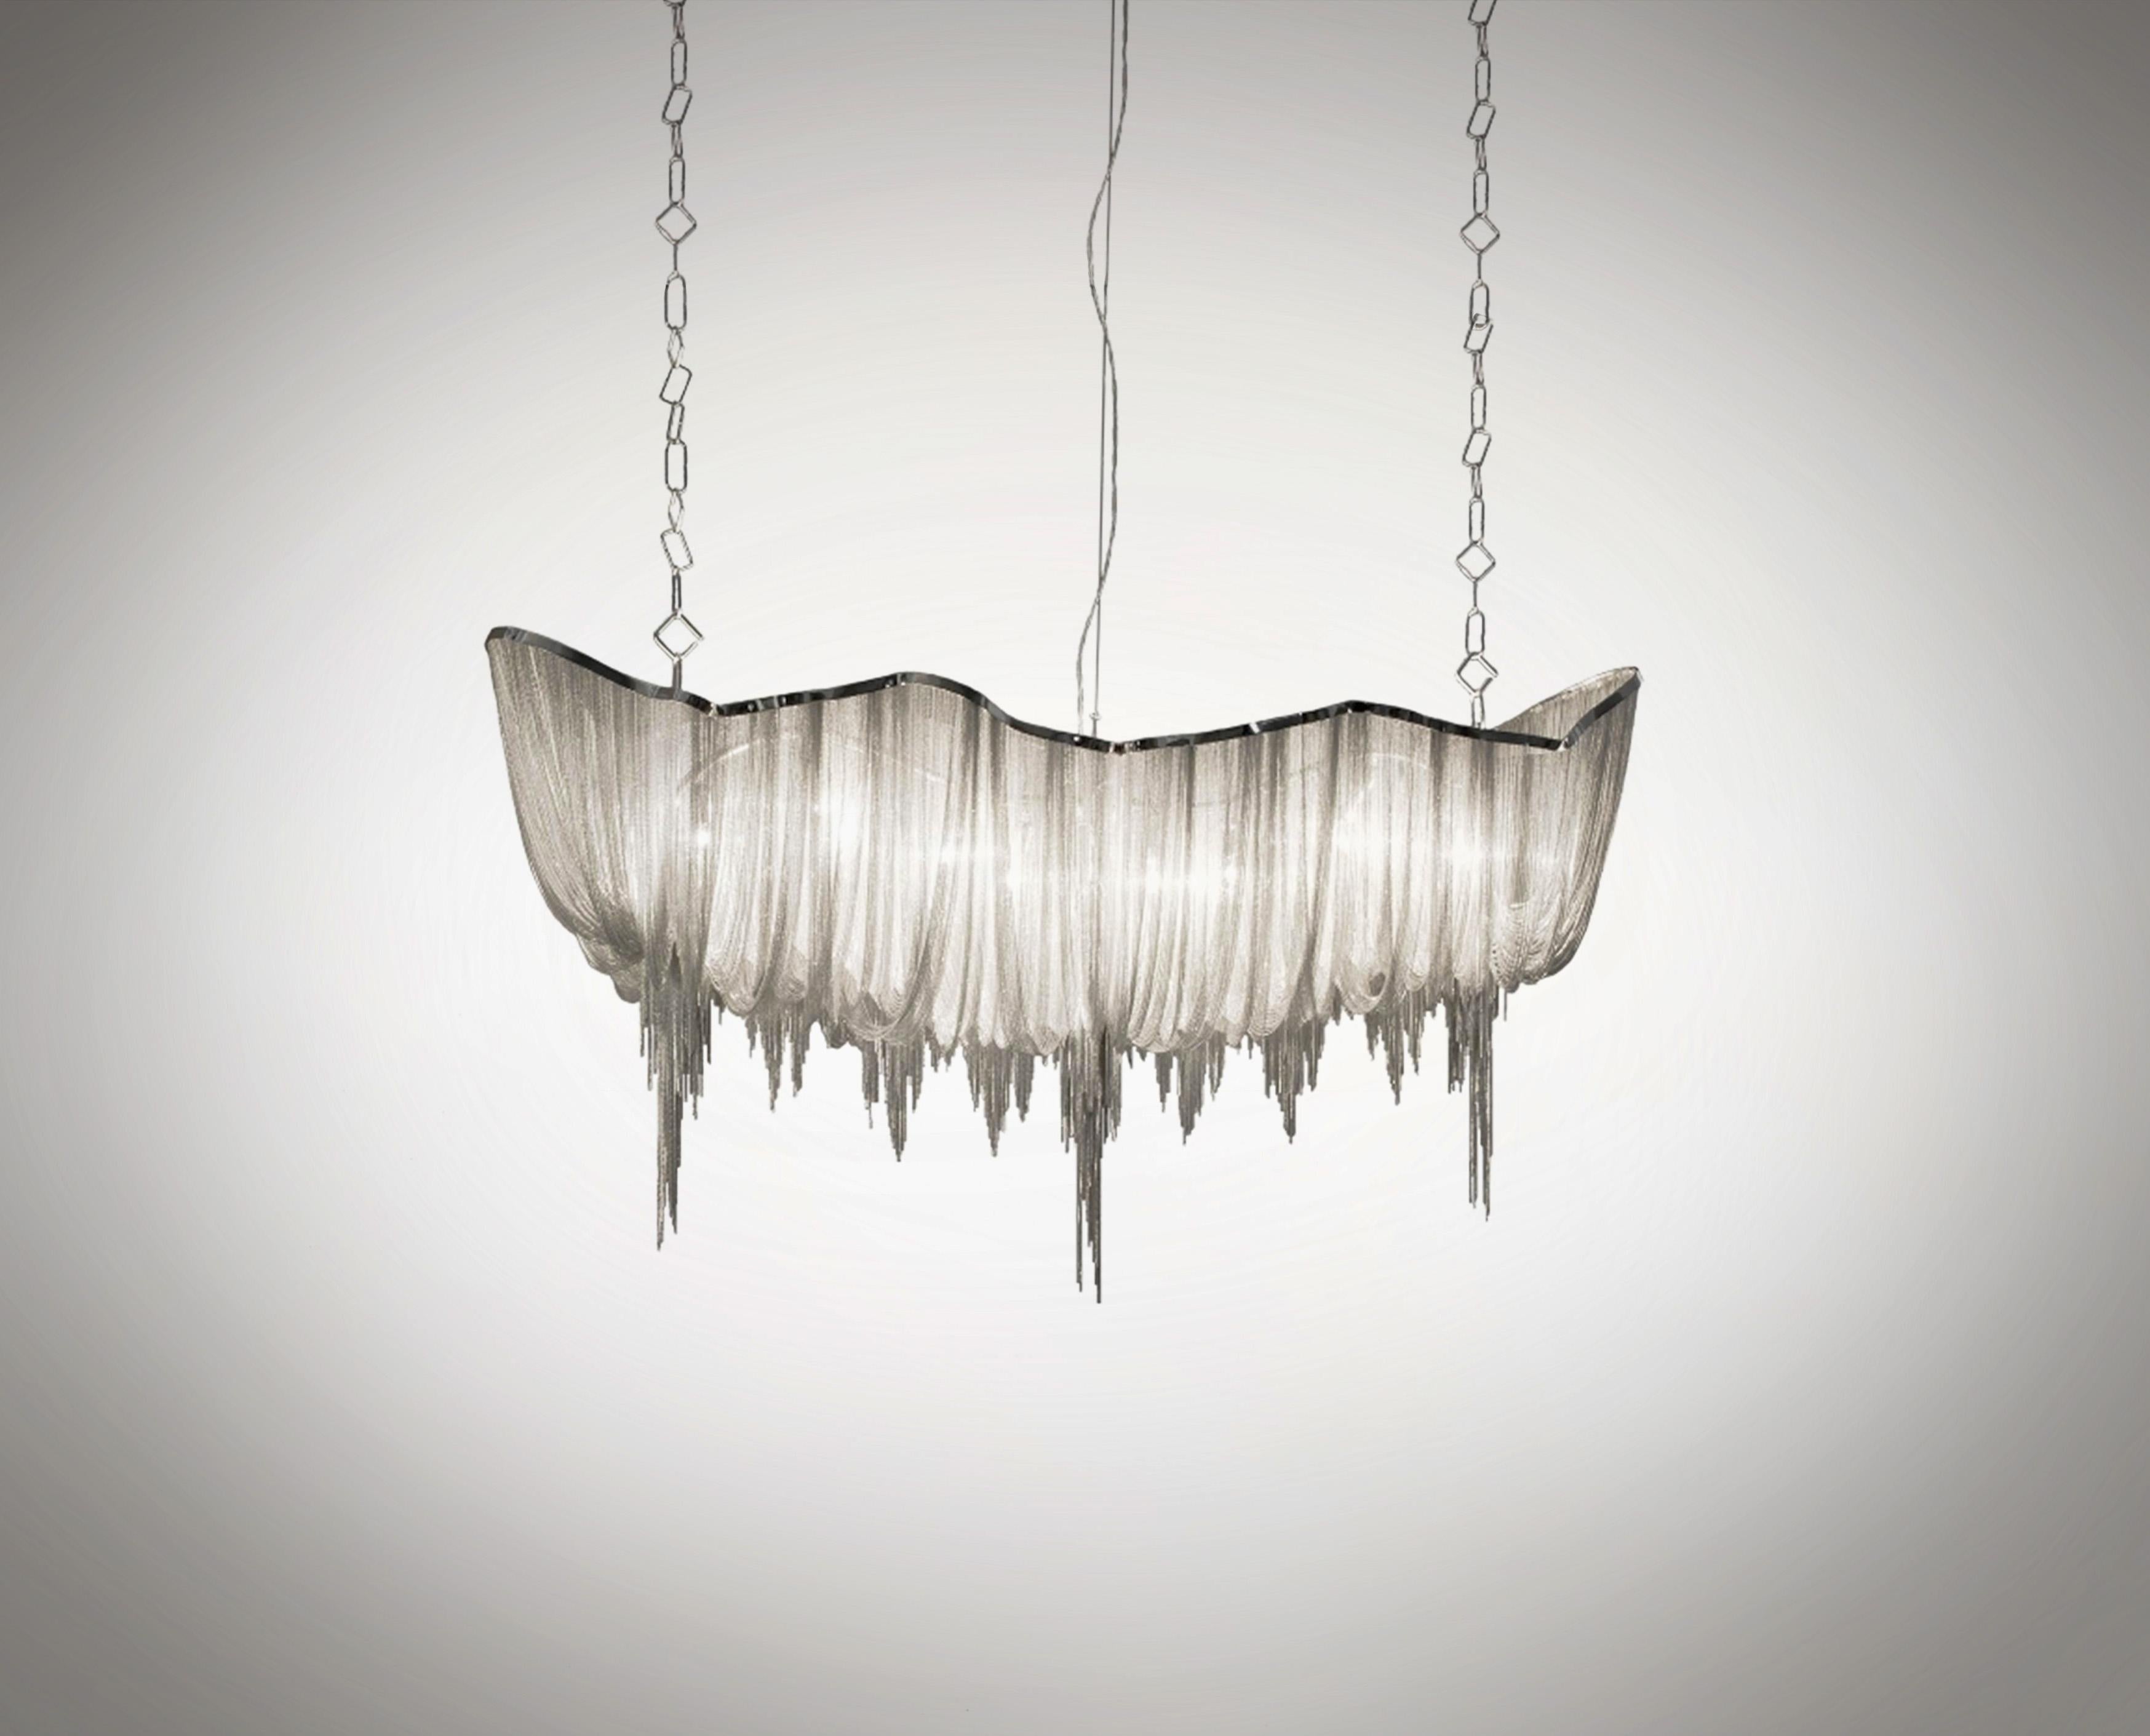 Immerse yourself in the shimmering elegance of the Atlantis chandelier, an iconic design creation by Barlas Baylar for Terzani, Italy. 

A chandelier design so innovative that Mr Karl Lagerfeld himself had to have one. This exquisite luminary is a